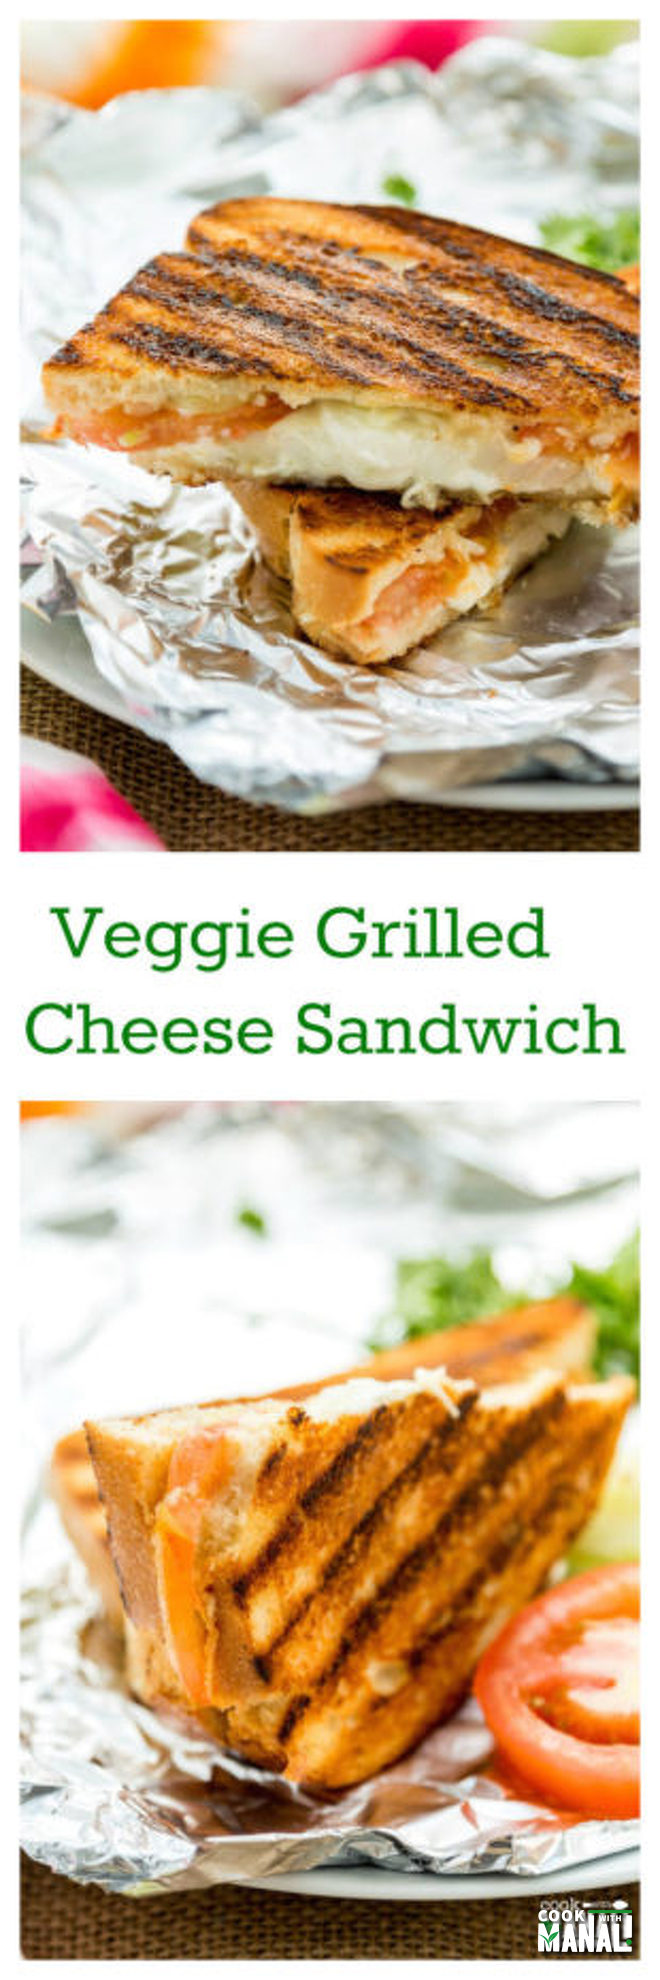 Veggie Grilled Cheese Sandwich - Cook With Manali